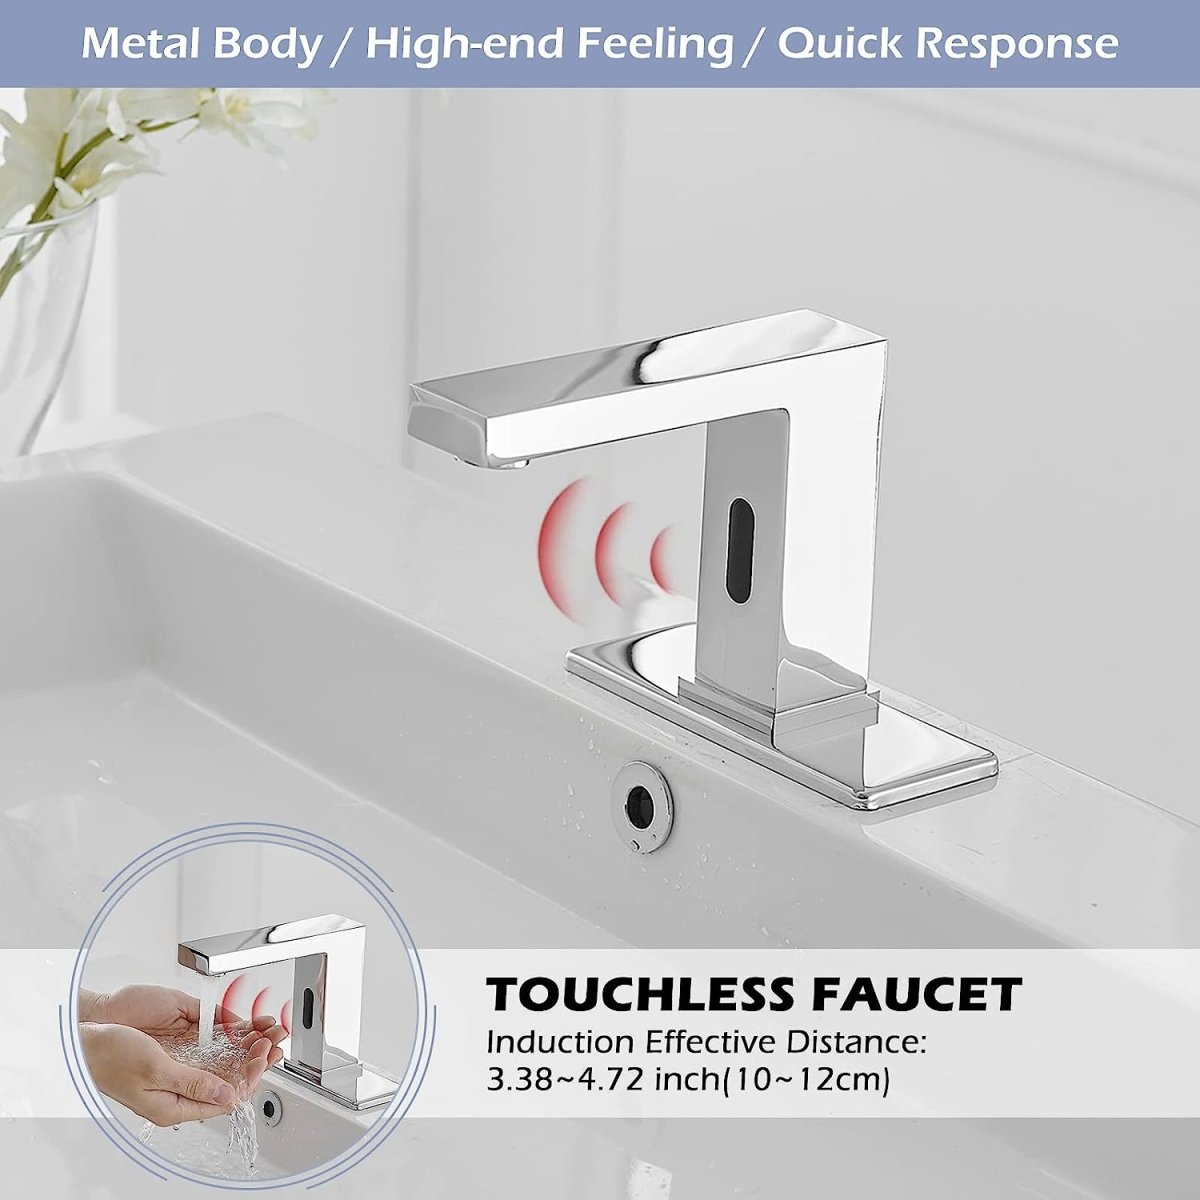 DC Powered Commercial Touchless Bathroom Faucets Chrome - buyfaucet.com